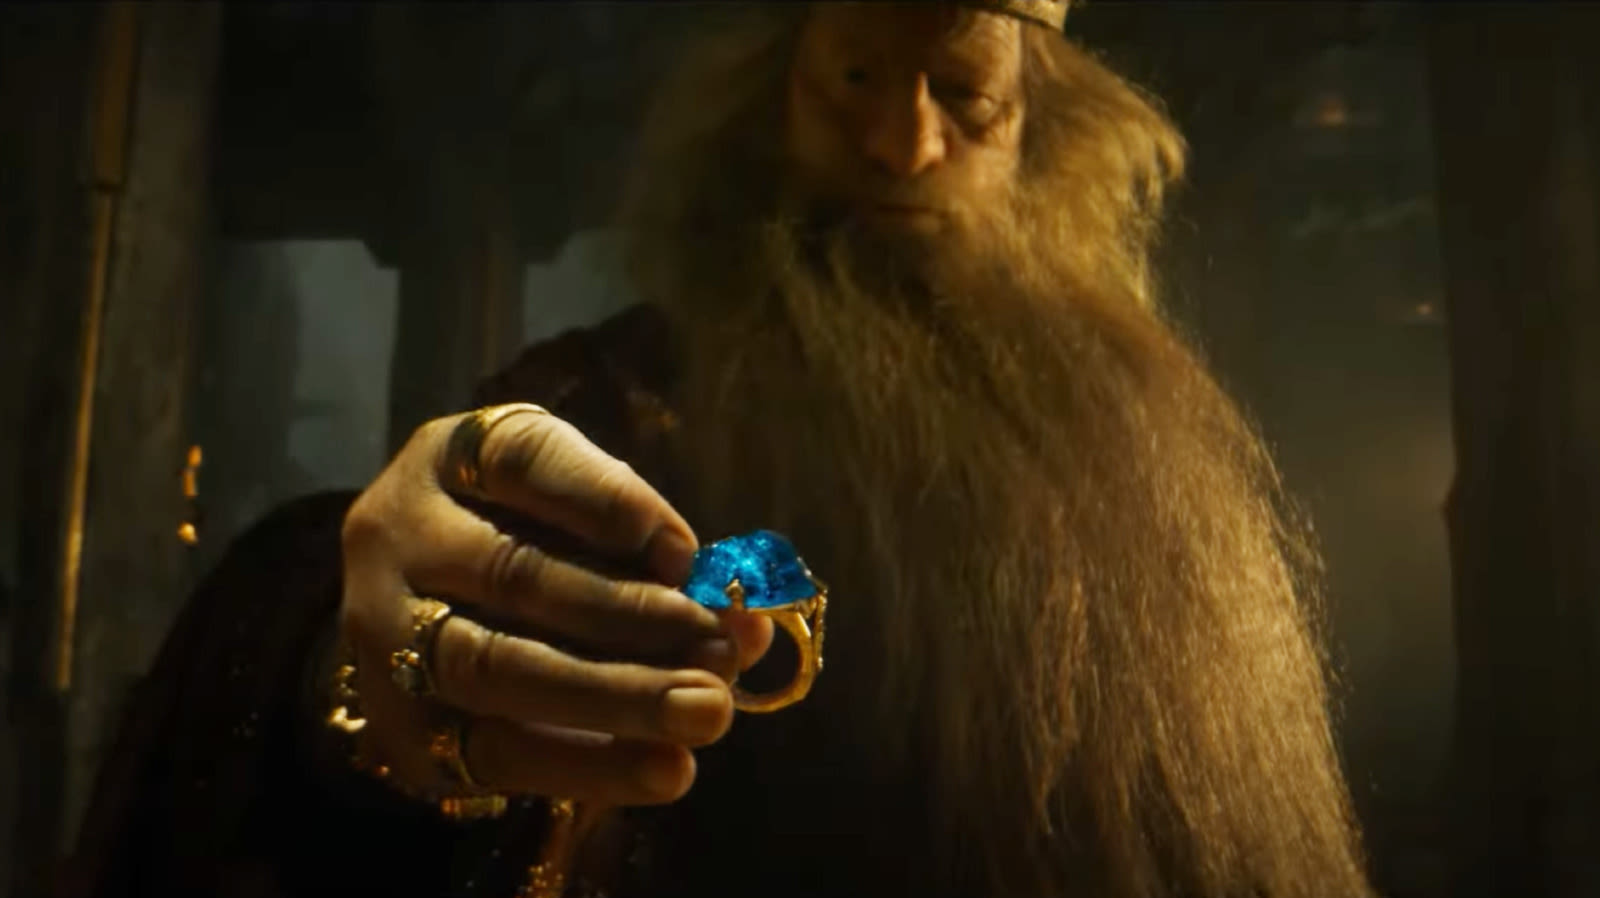 The Lord Of The Rings: The Rings Of Power Season 2 Teaser Reveals Sauron's New Form - SlashFilm